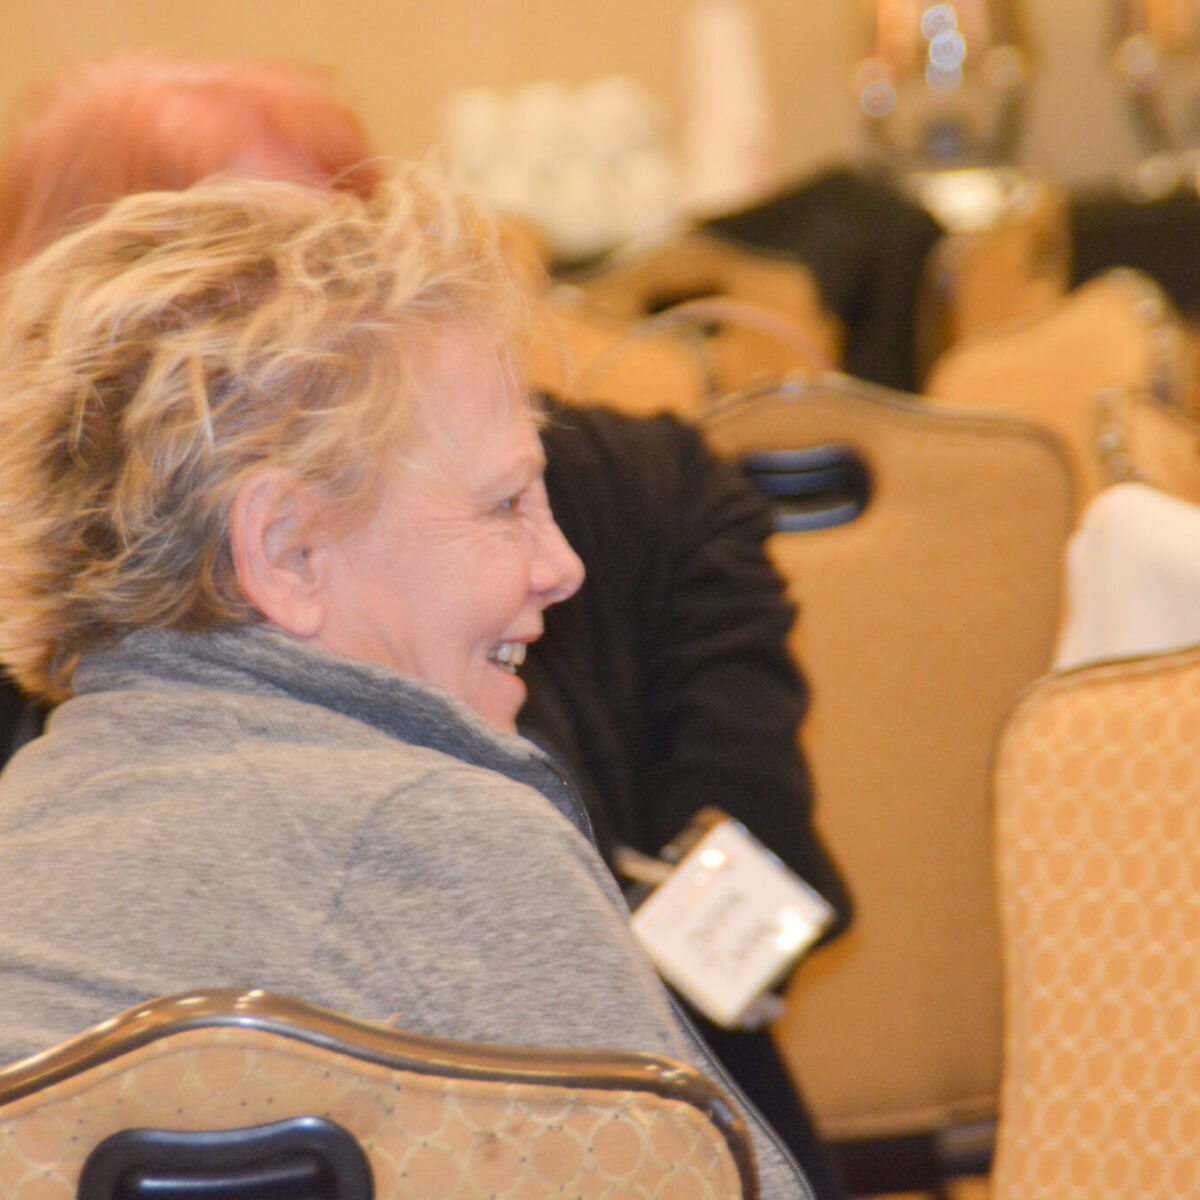 Conference attendee with short blonde hair smiling.